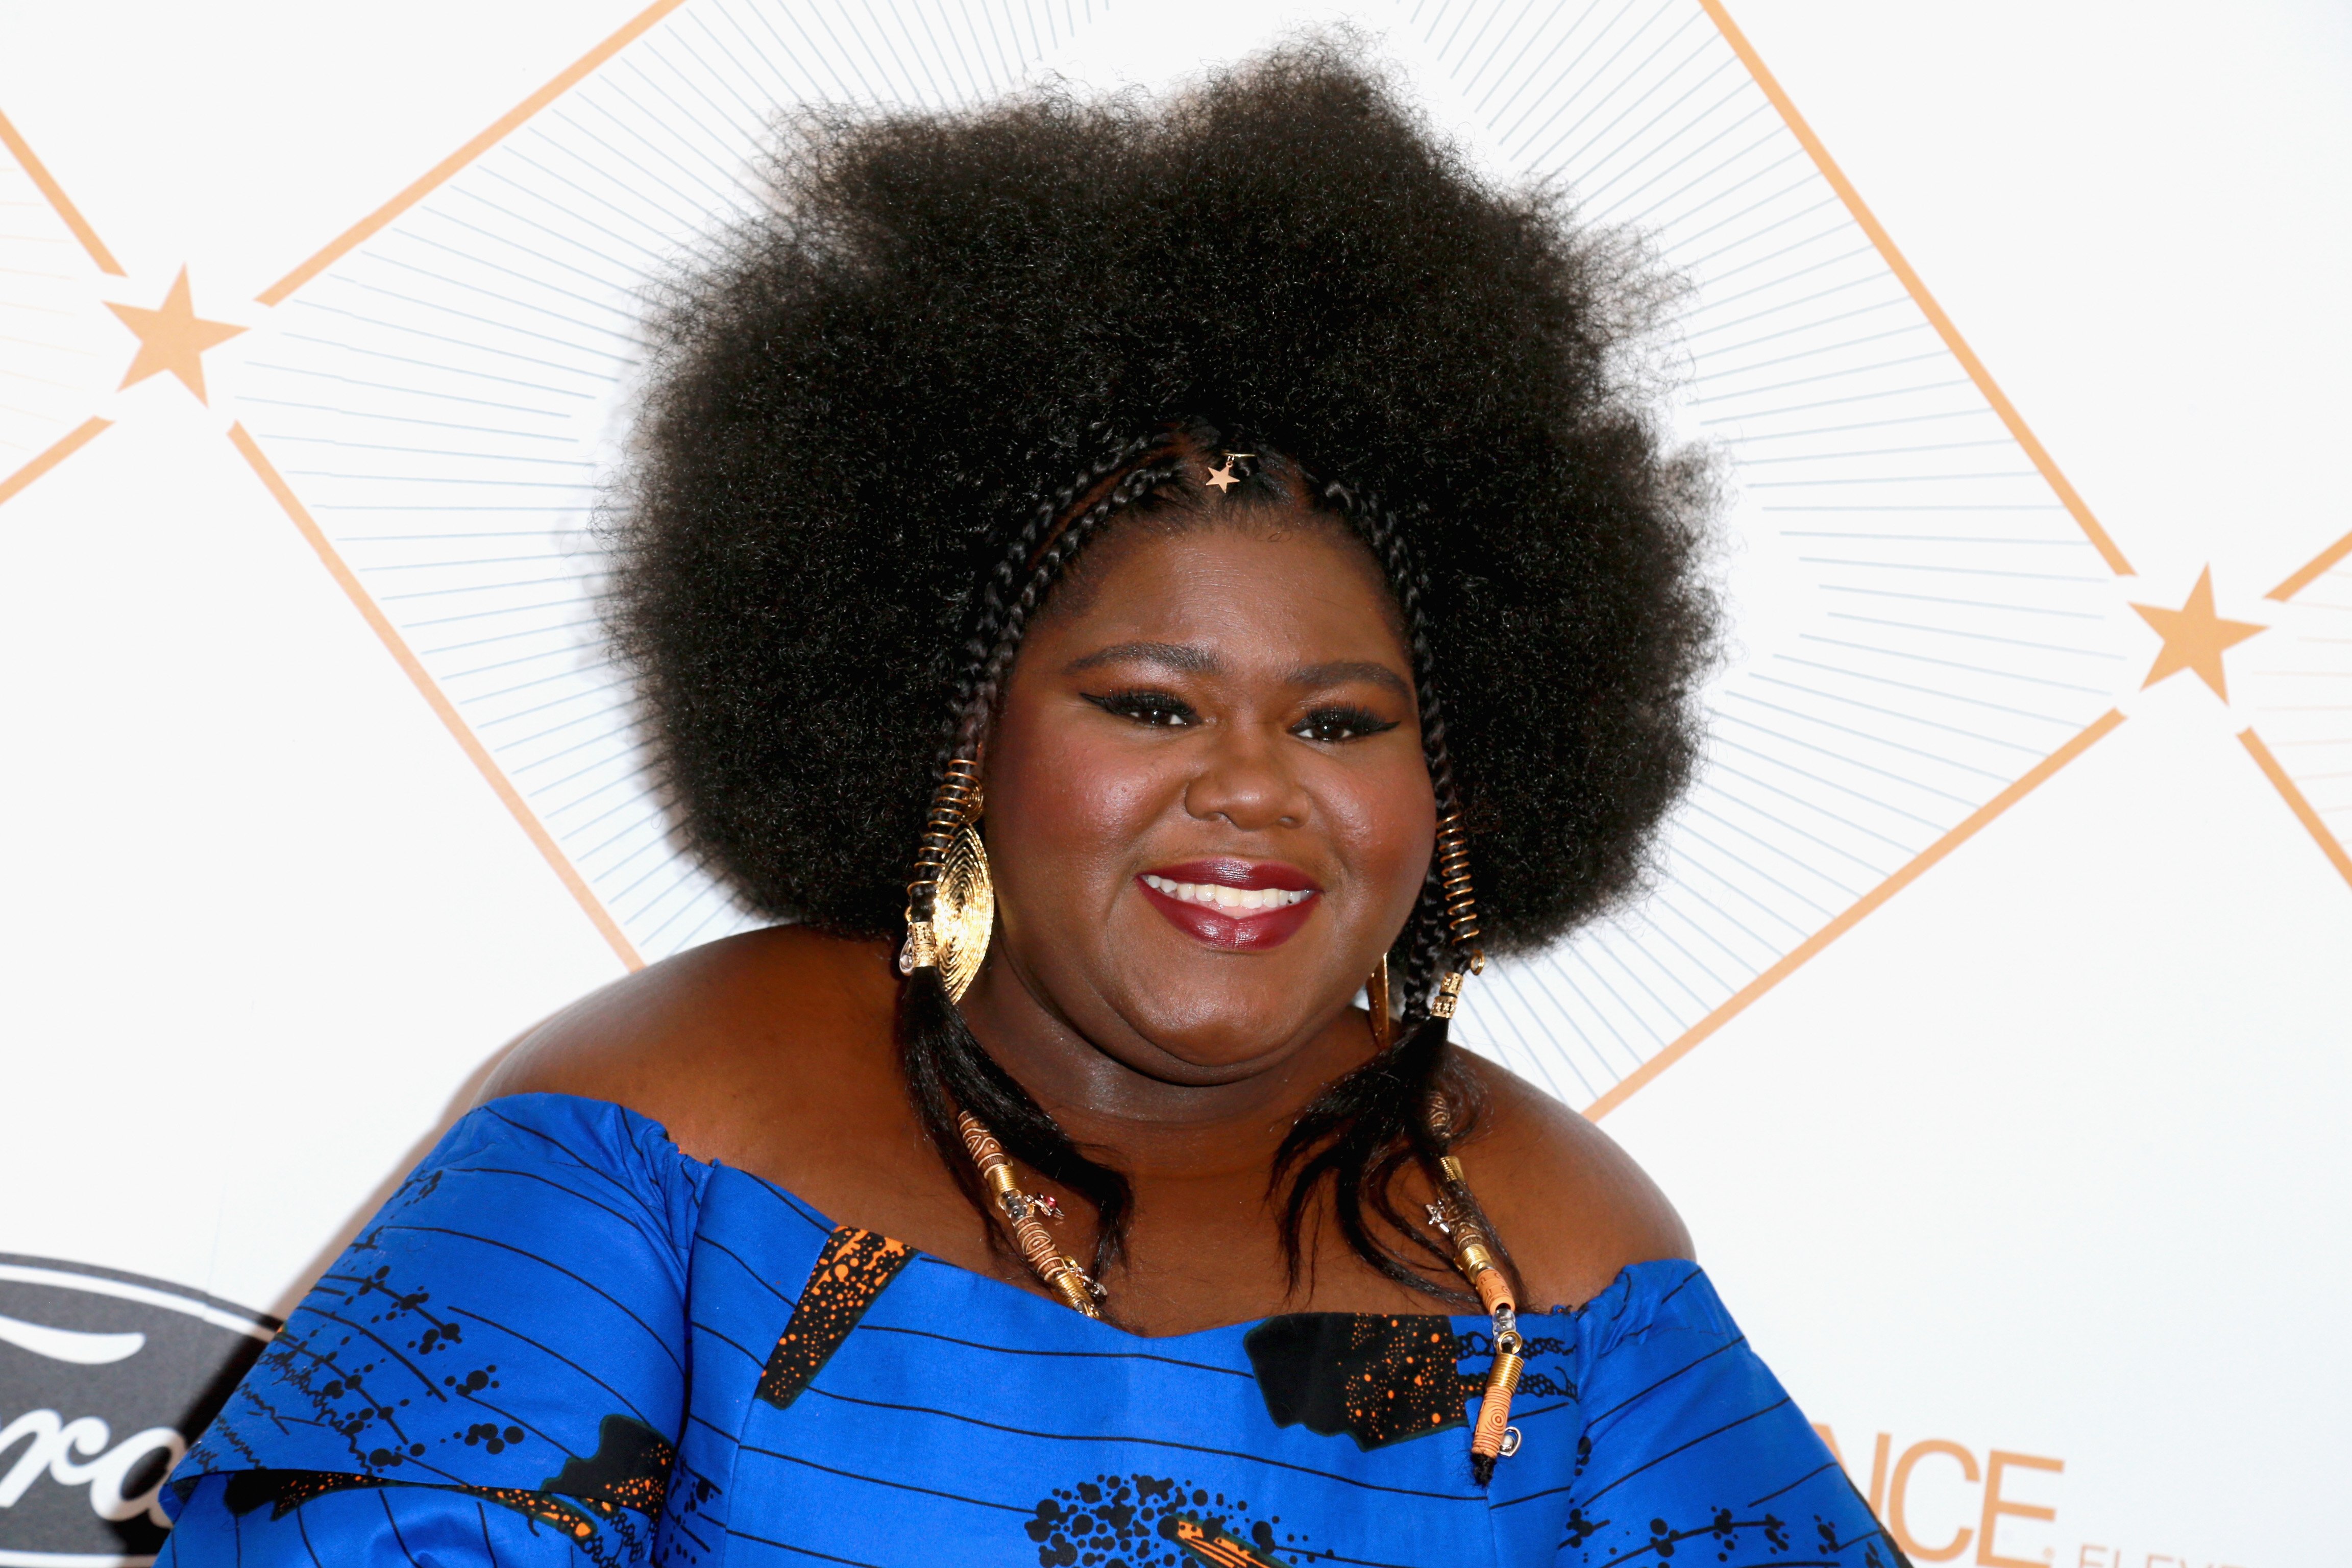 Gabourey Sidibe at the 2018 Essence Black Women In Hollywood Oscars Luncheon on Mar. 1, 2018 in California | Photo: Getty Images